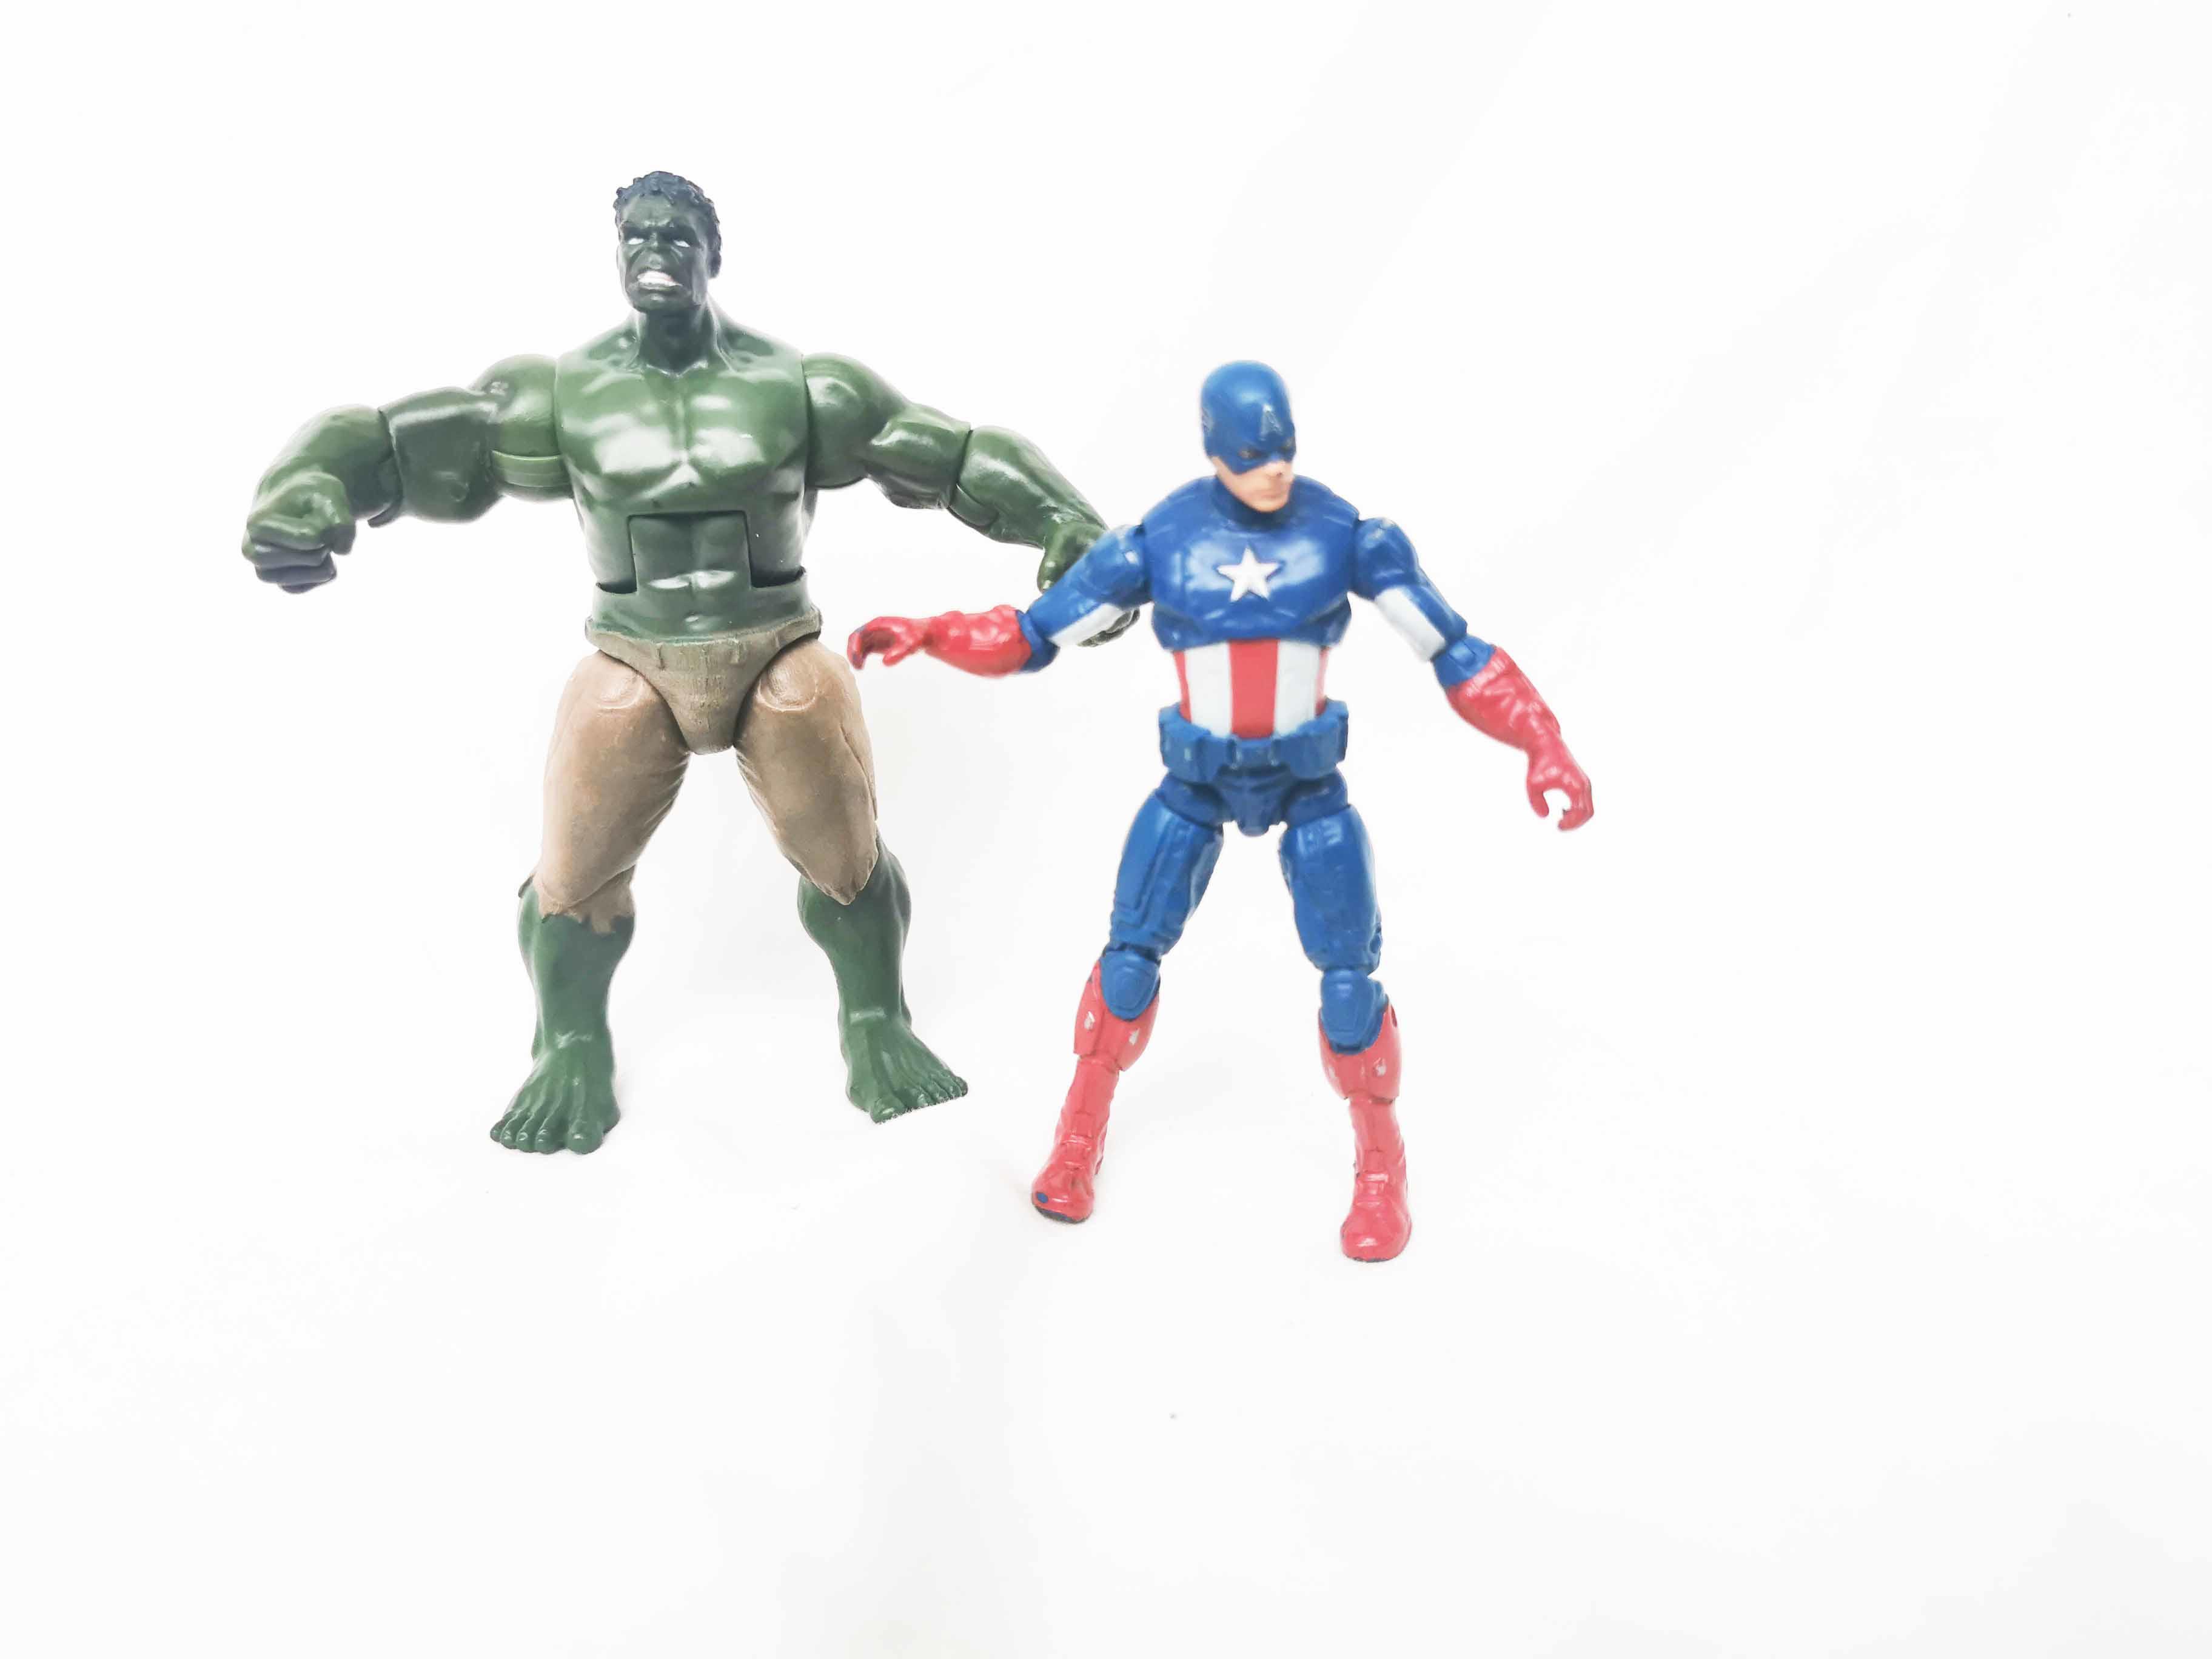 The Hulk and Captain America Marvel Universe Avengers Movie 3.75 Action figures